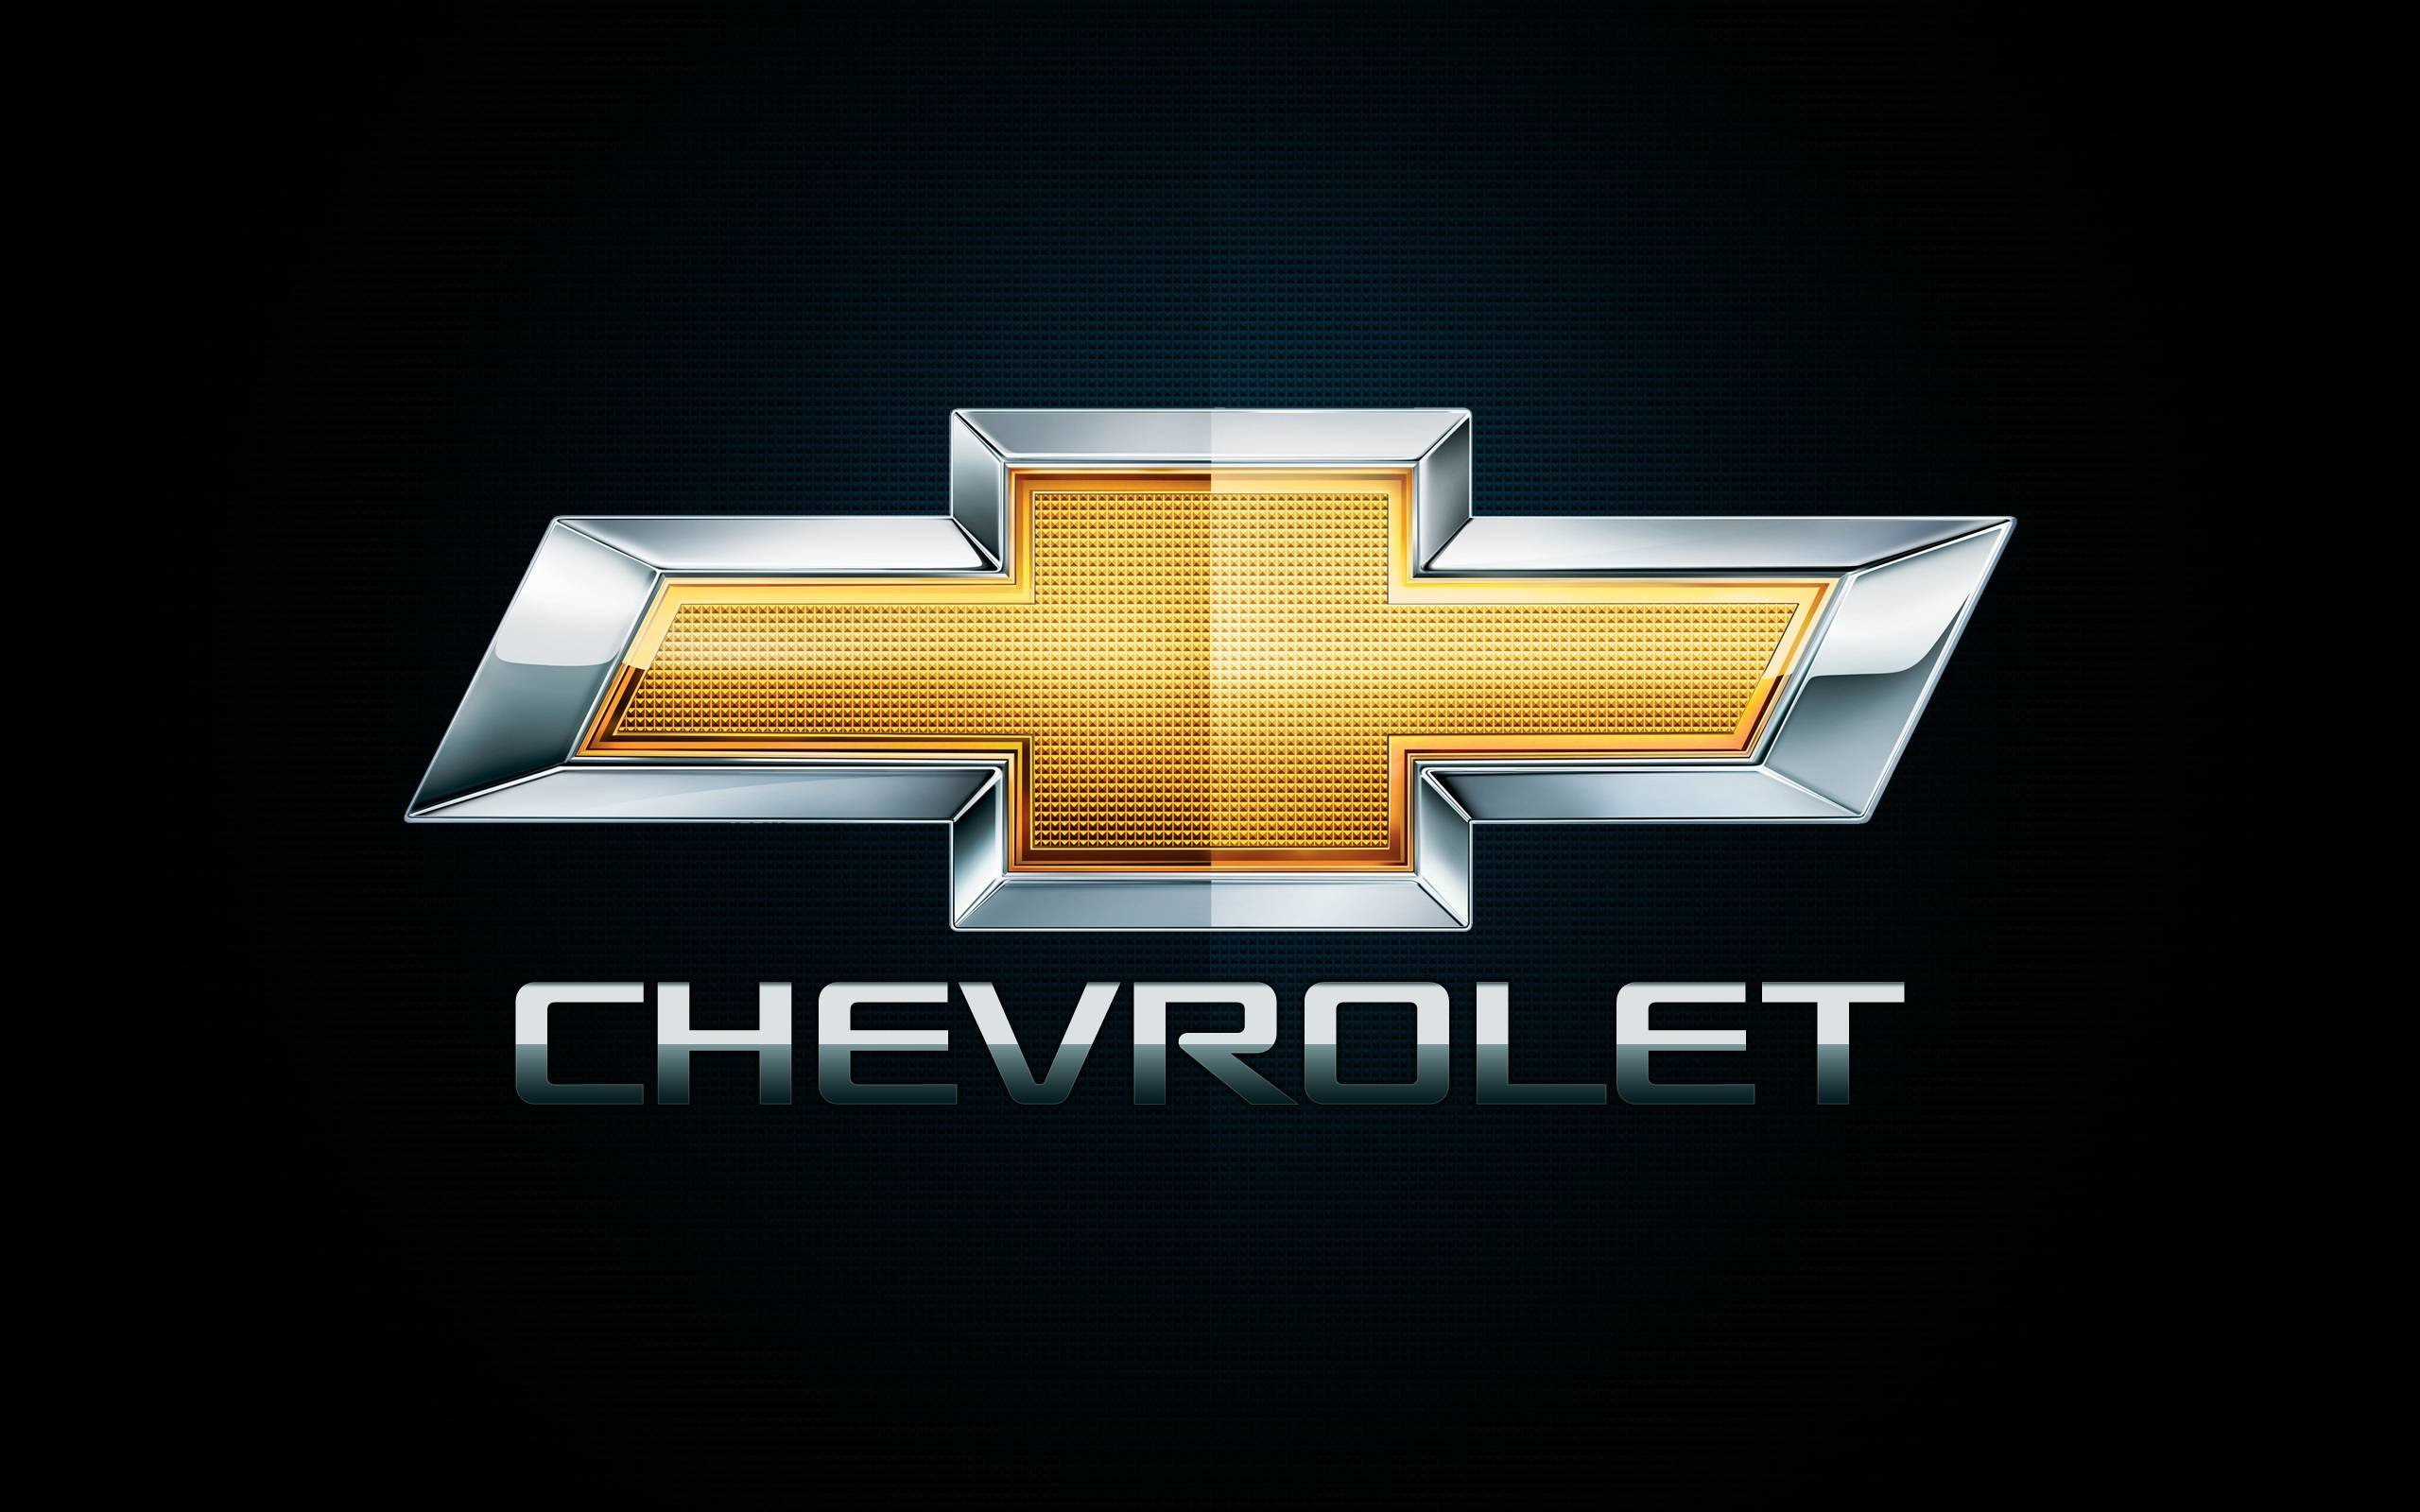 64 Chevy Bowtie Wallpapers on WallpaperPlay